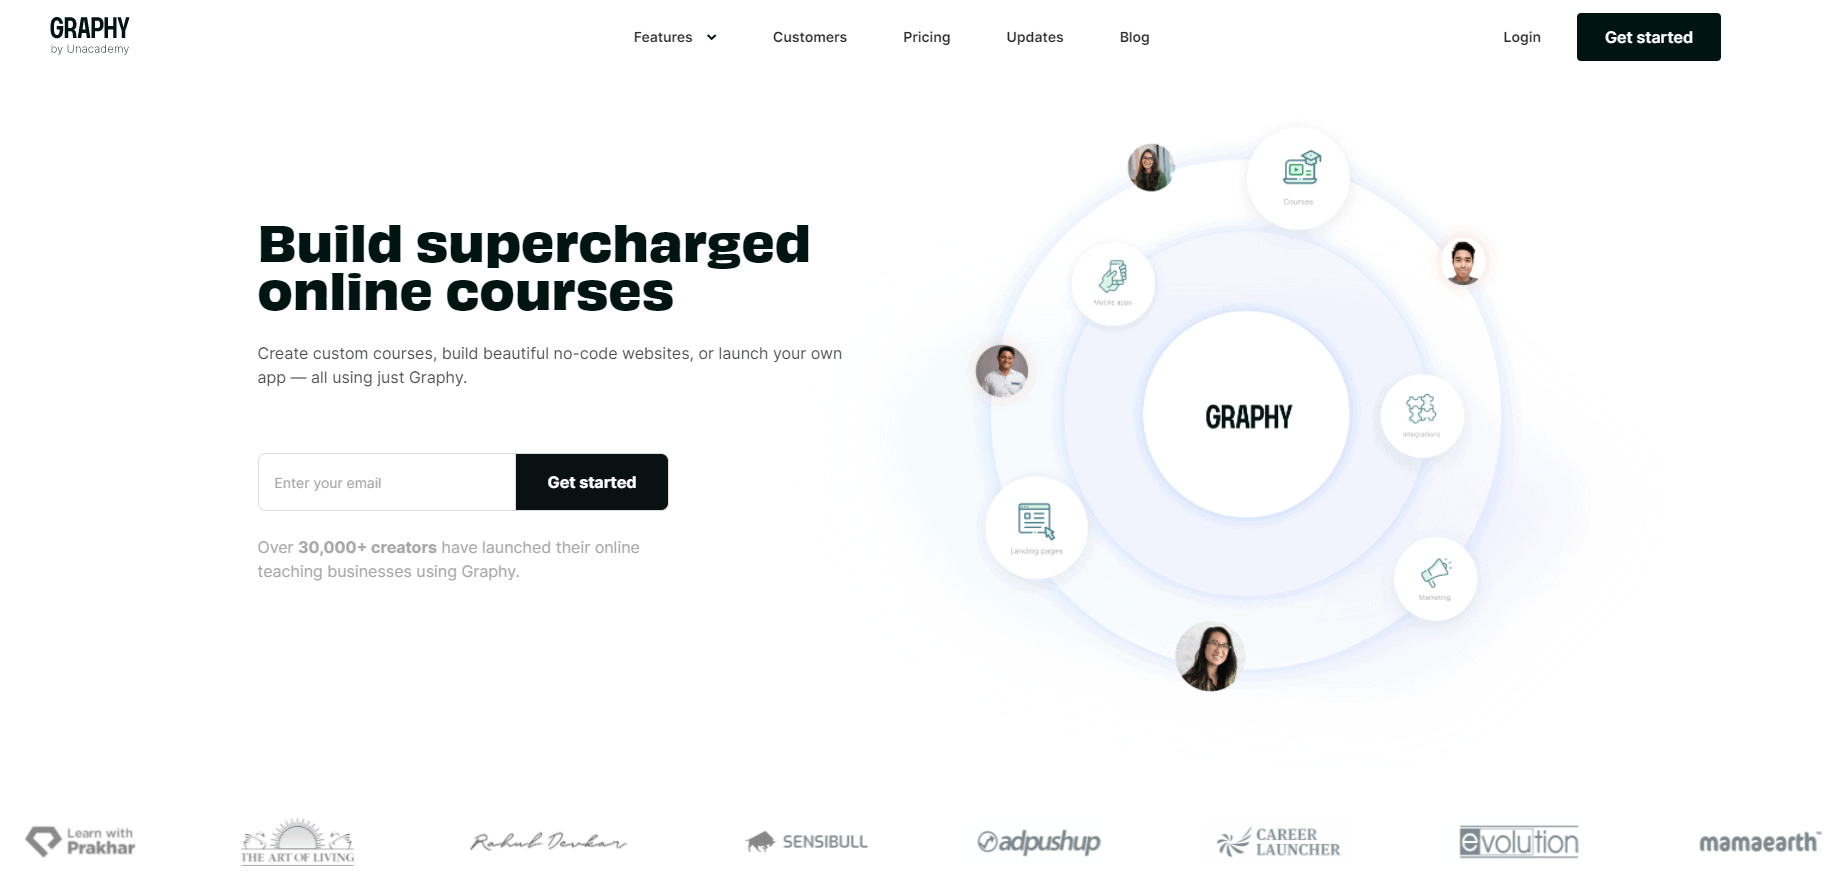 Graphy Homepage - How To Sell Online Courses In India